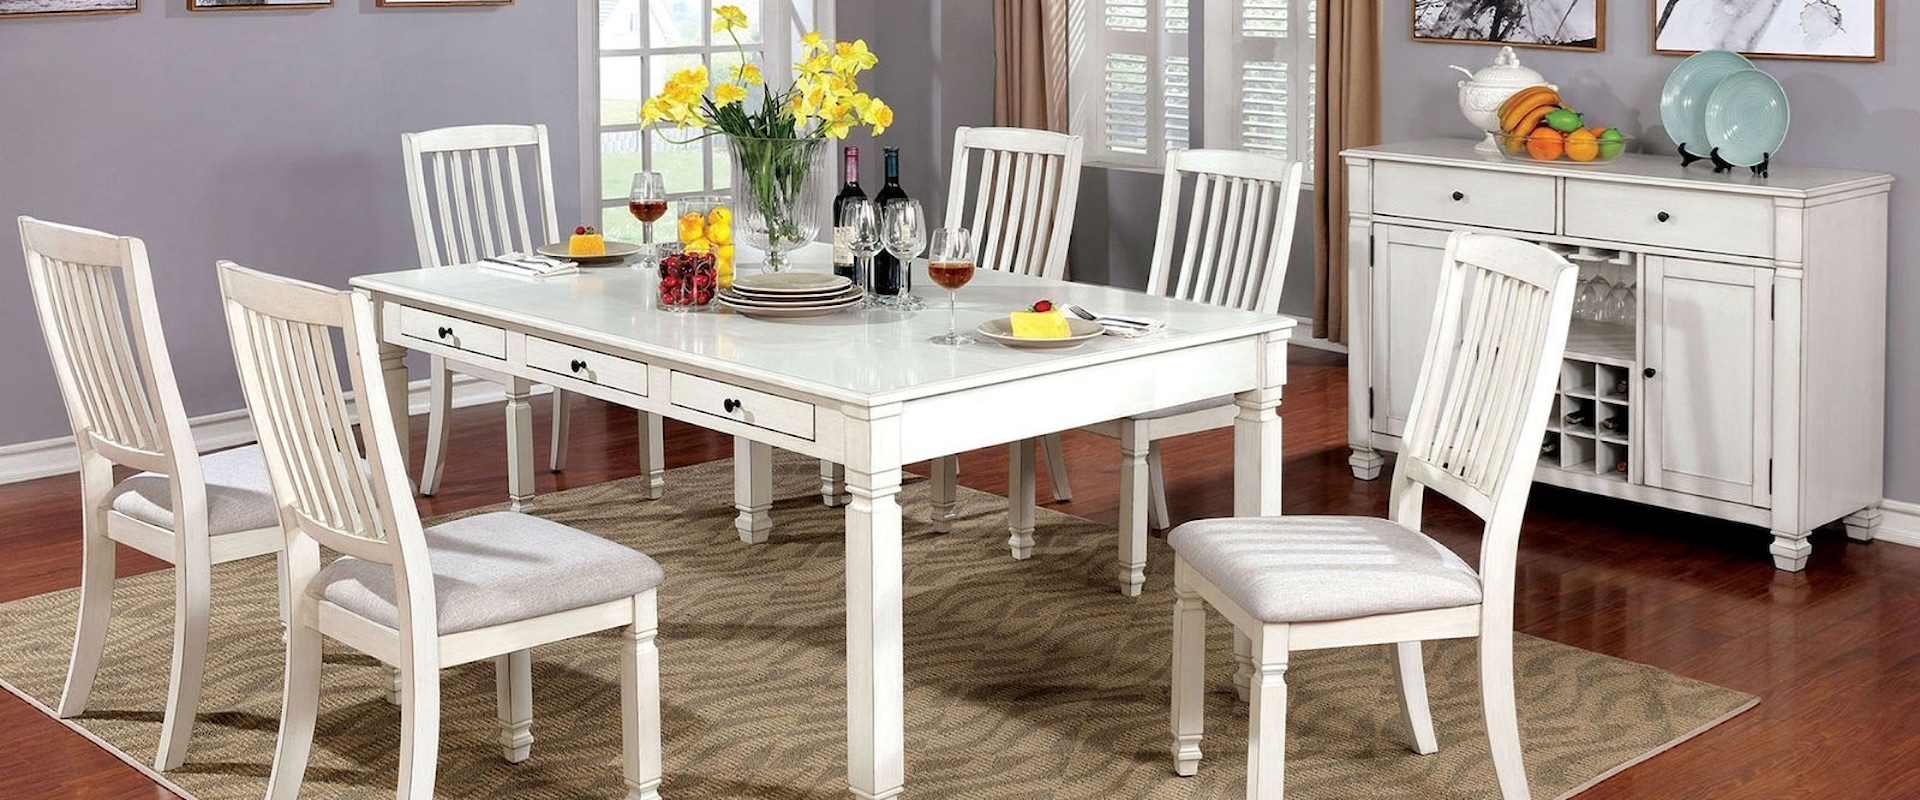 Seven Piece Cottage Style Dining Set with Built-in Storage